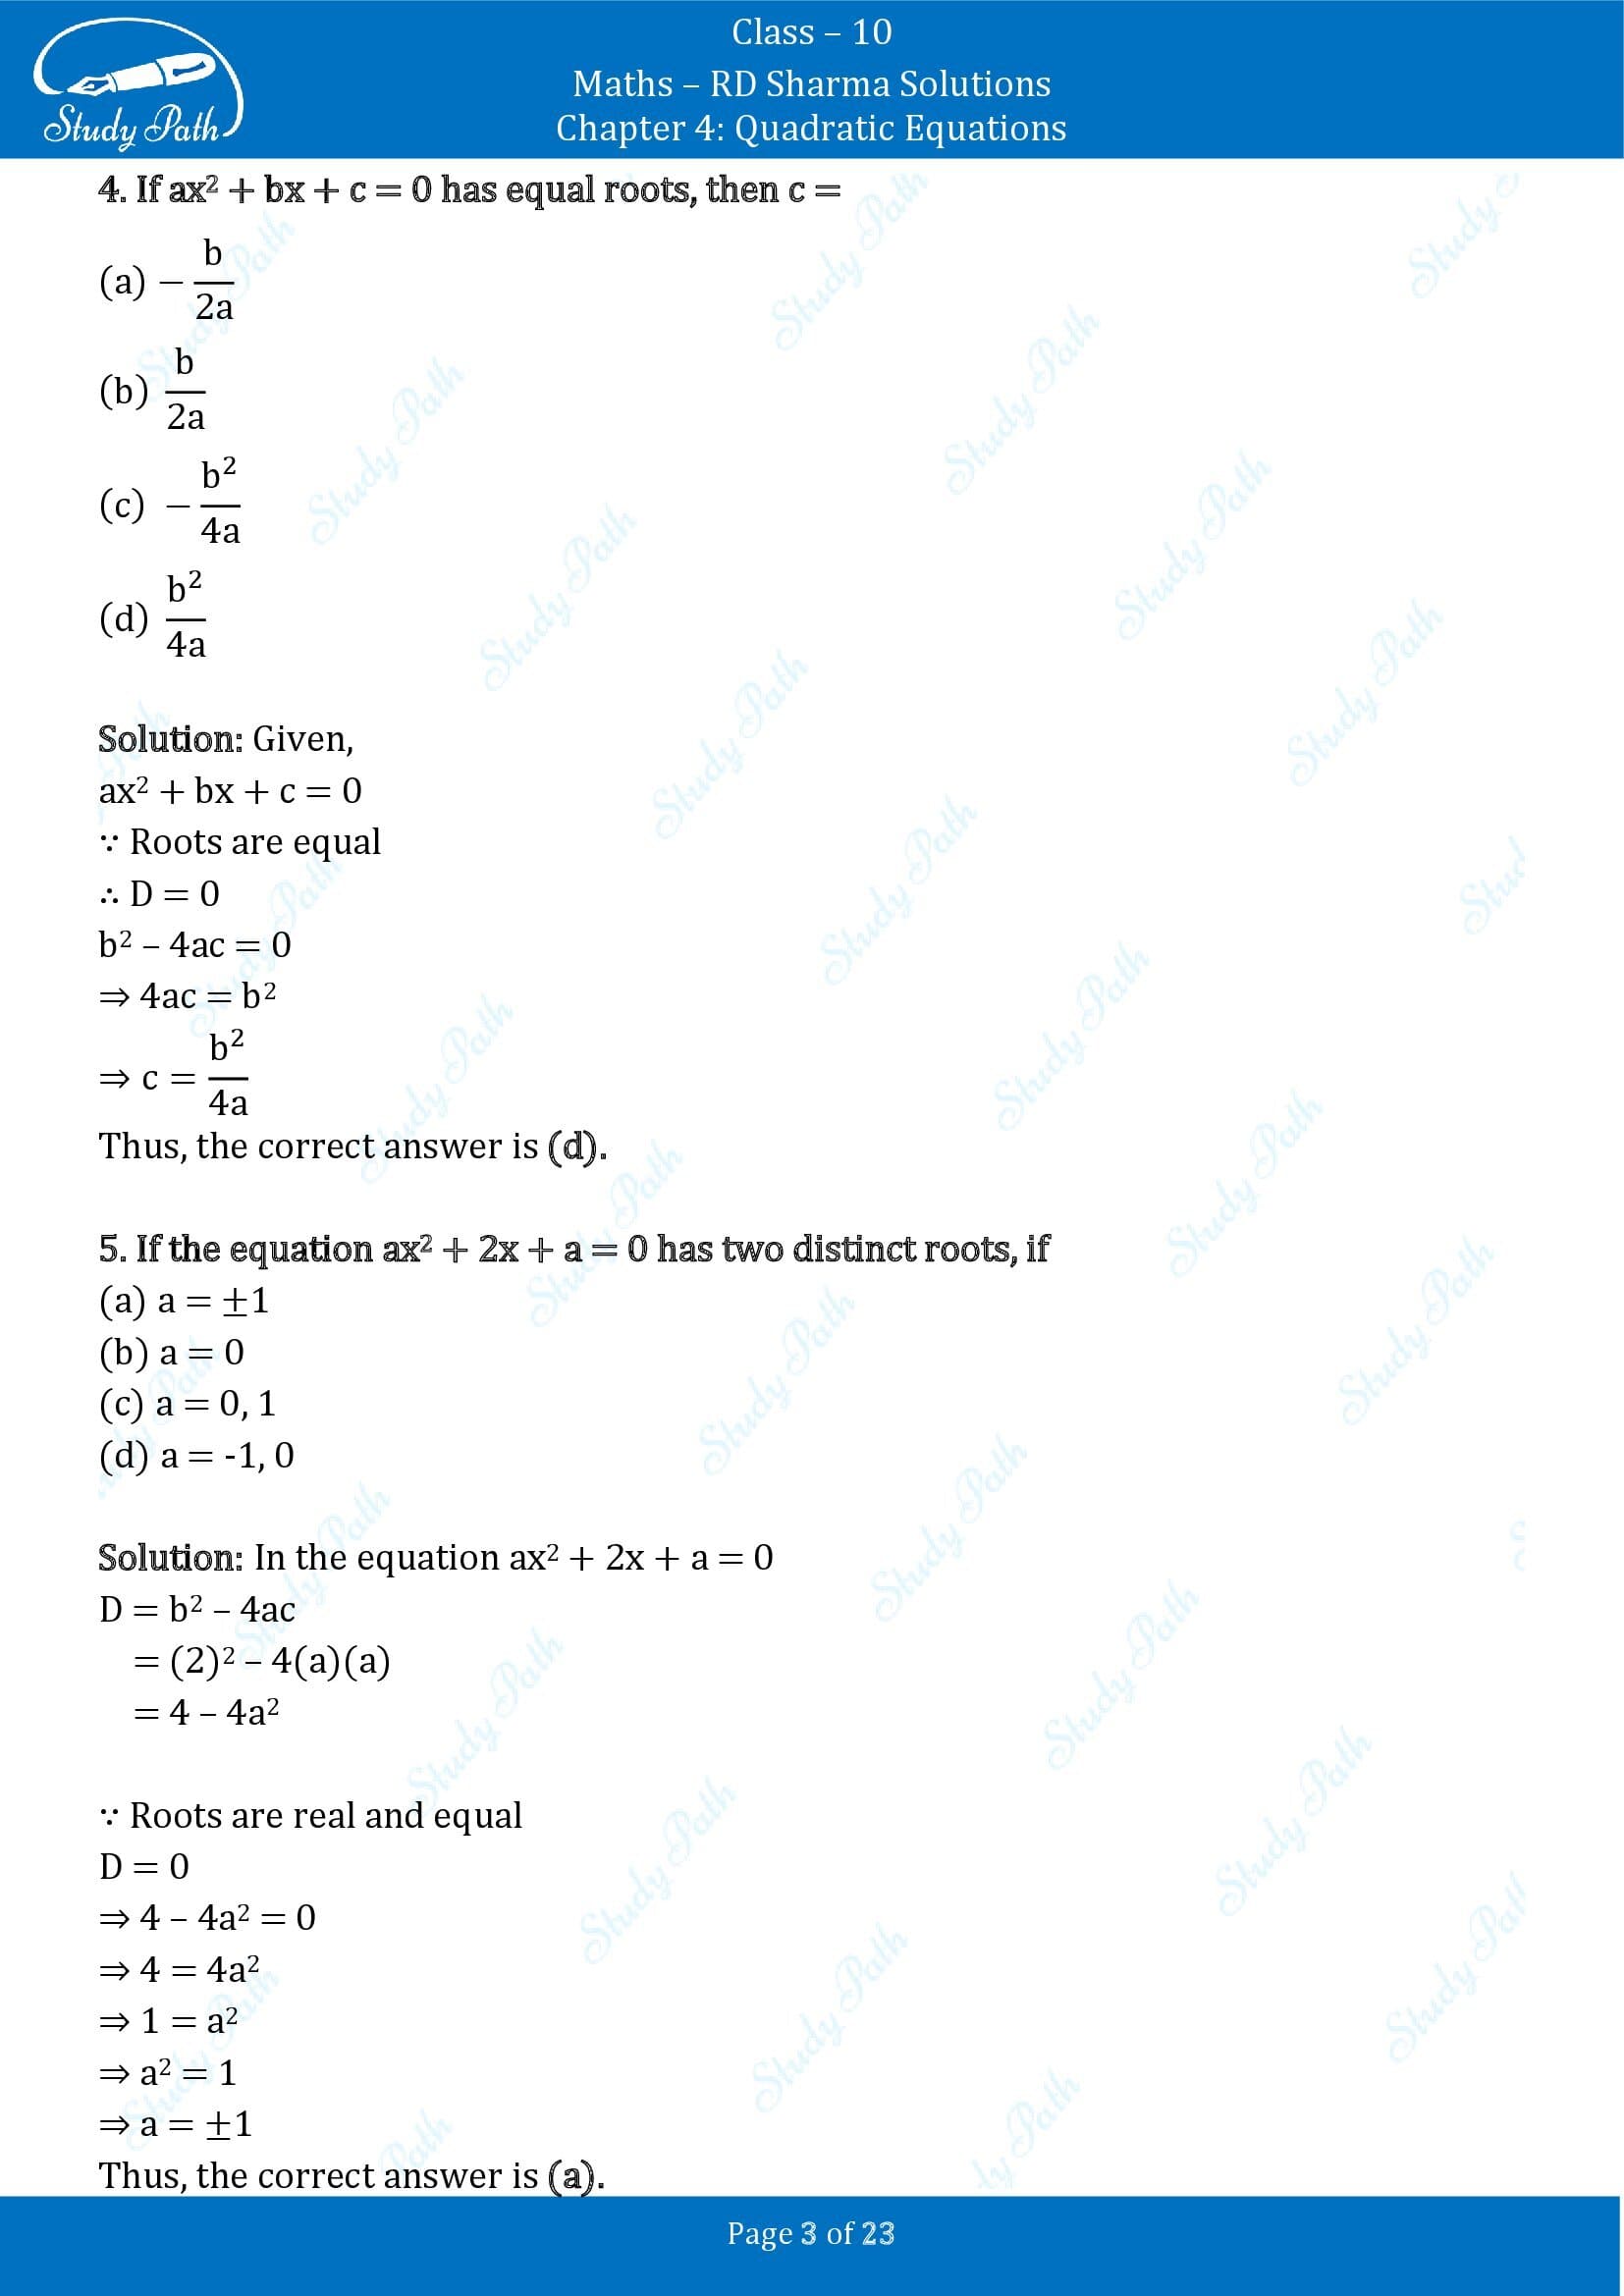 RD Sharma Solutions Class 10 Chapter 4 Quadratic Equations Multiple Choice Questions MCQs 00003